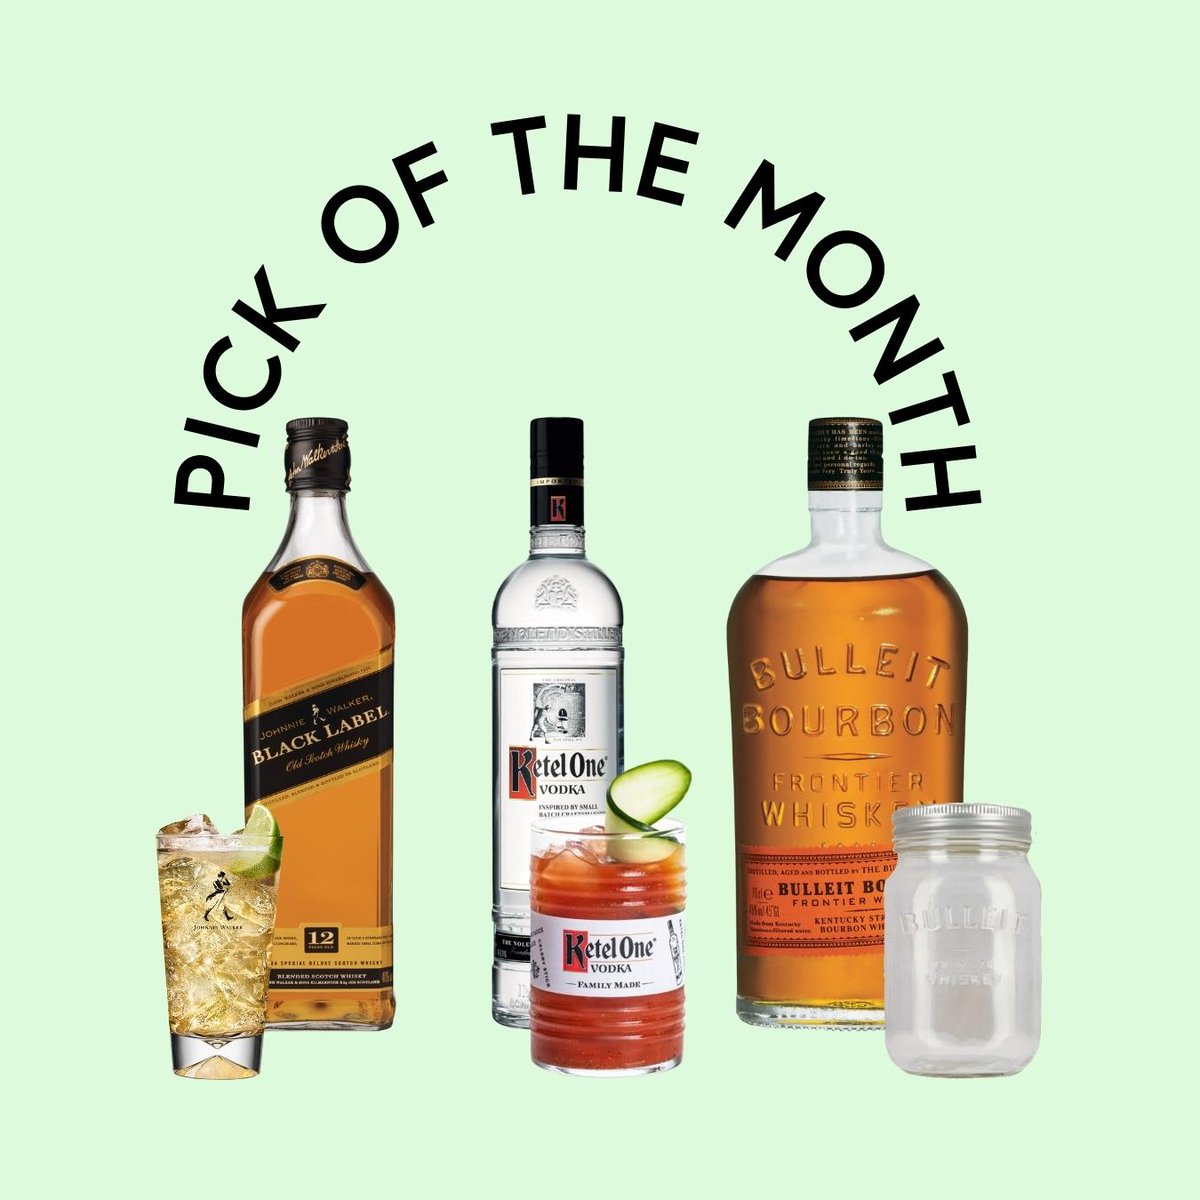 For this month's POTM you can get 4 GLASSES FREE with a bottle! Choose from: 🥃 Johnnie Walker Black Label 🥃 Ketel One Vodka 🥃 Bulleit Bourbon Whisky 1. Add your bottle! 2. Add four glasses! 3. Nothing - we will discount it for you bedrinkaware.co.uk